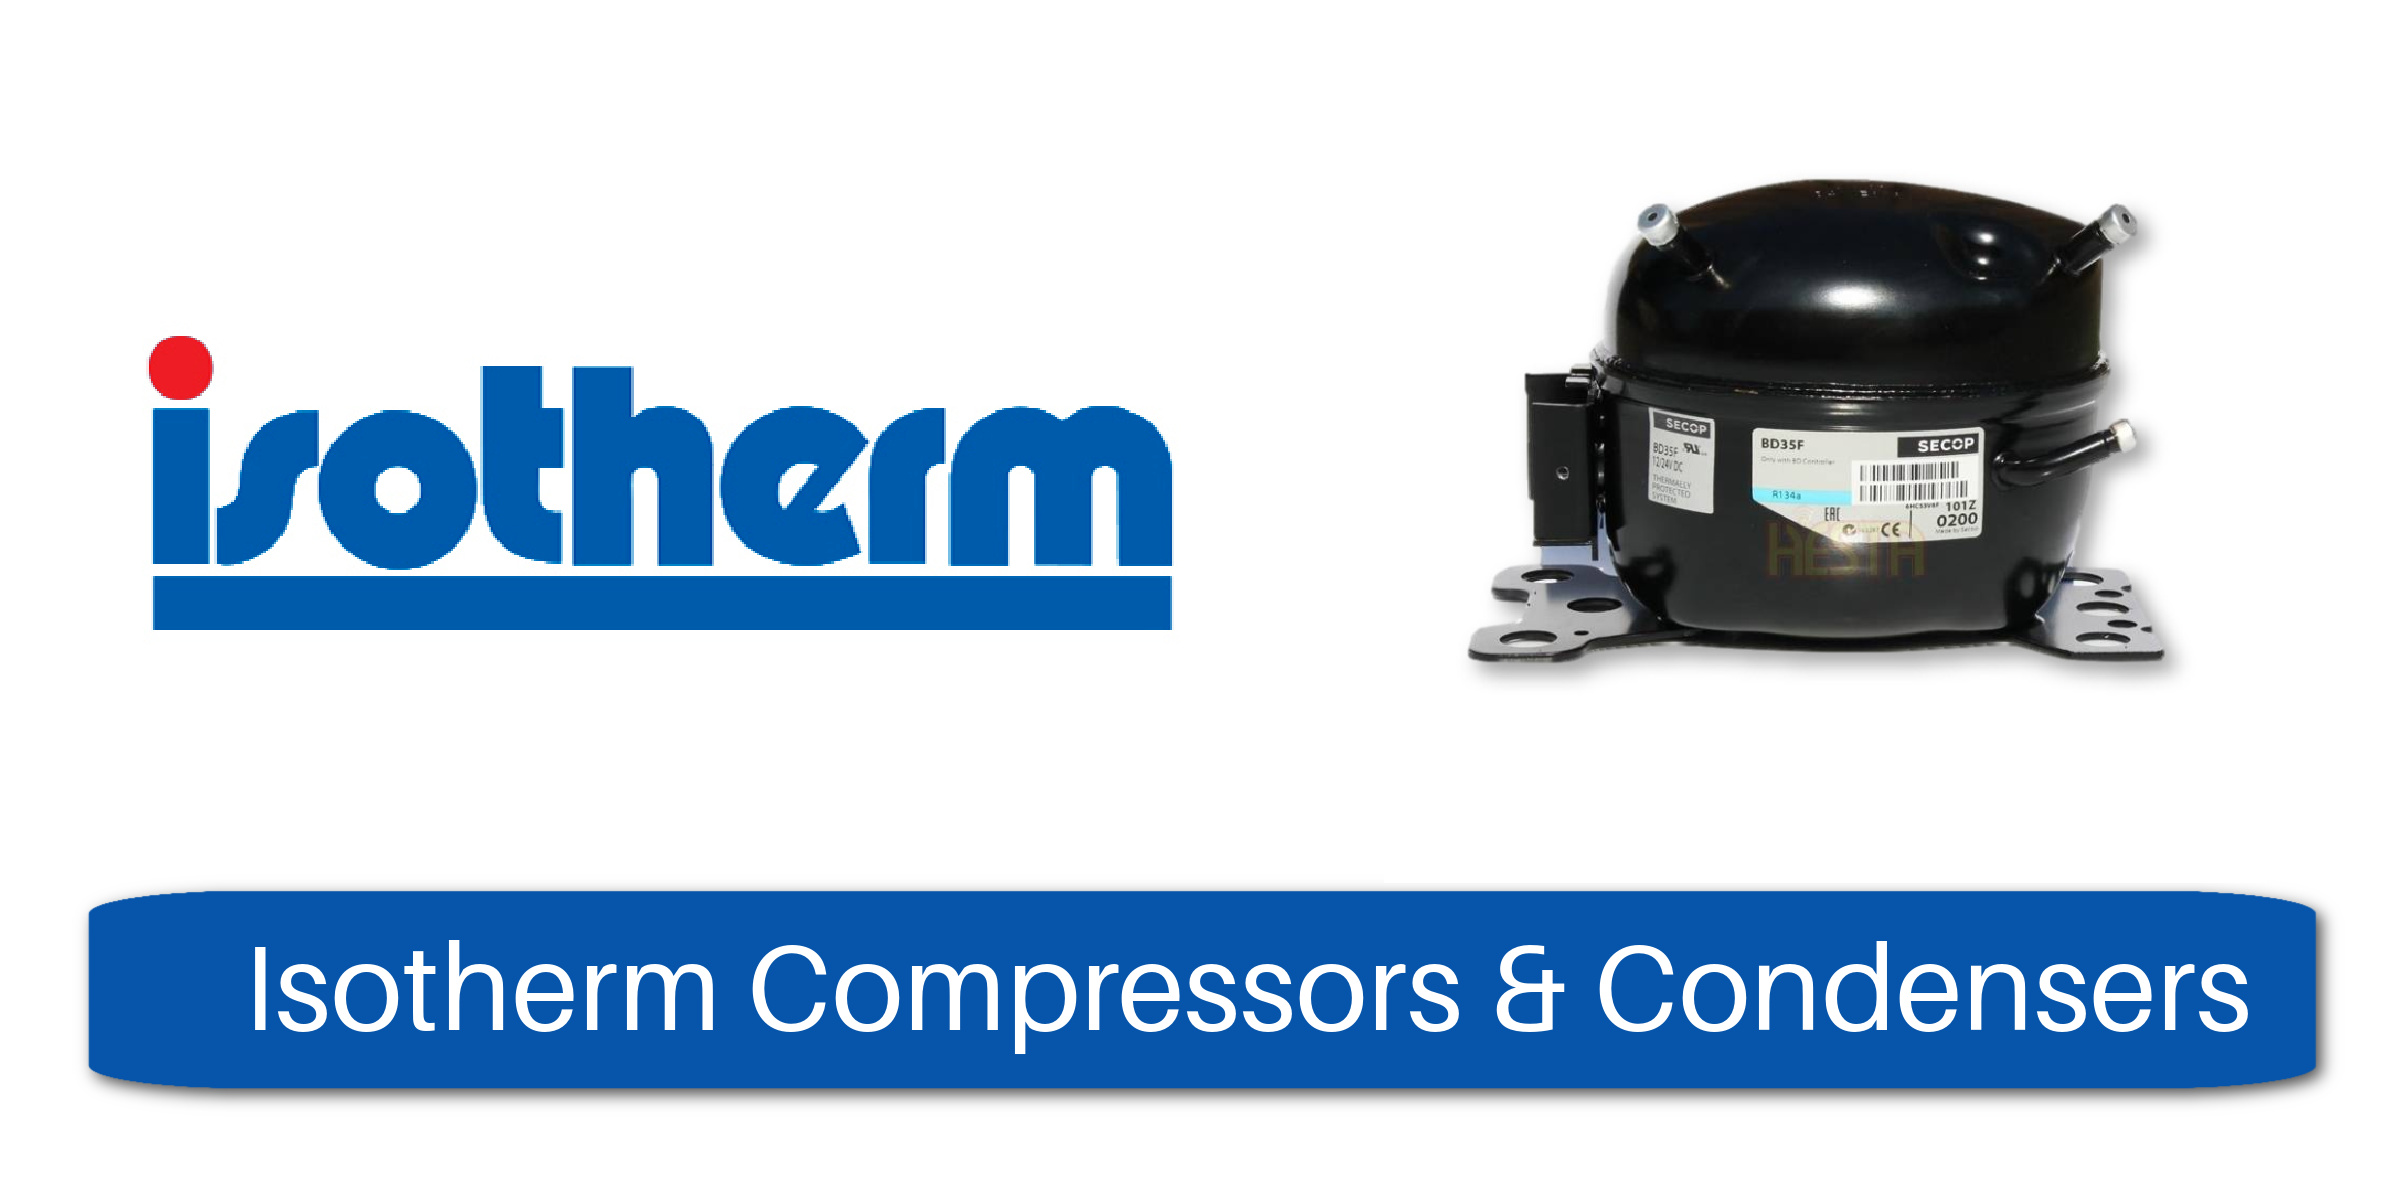 Isotherm Compressors & Condensers